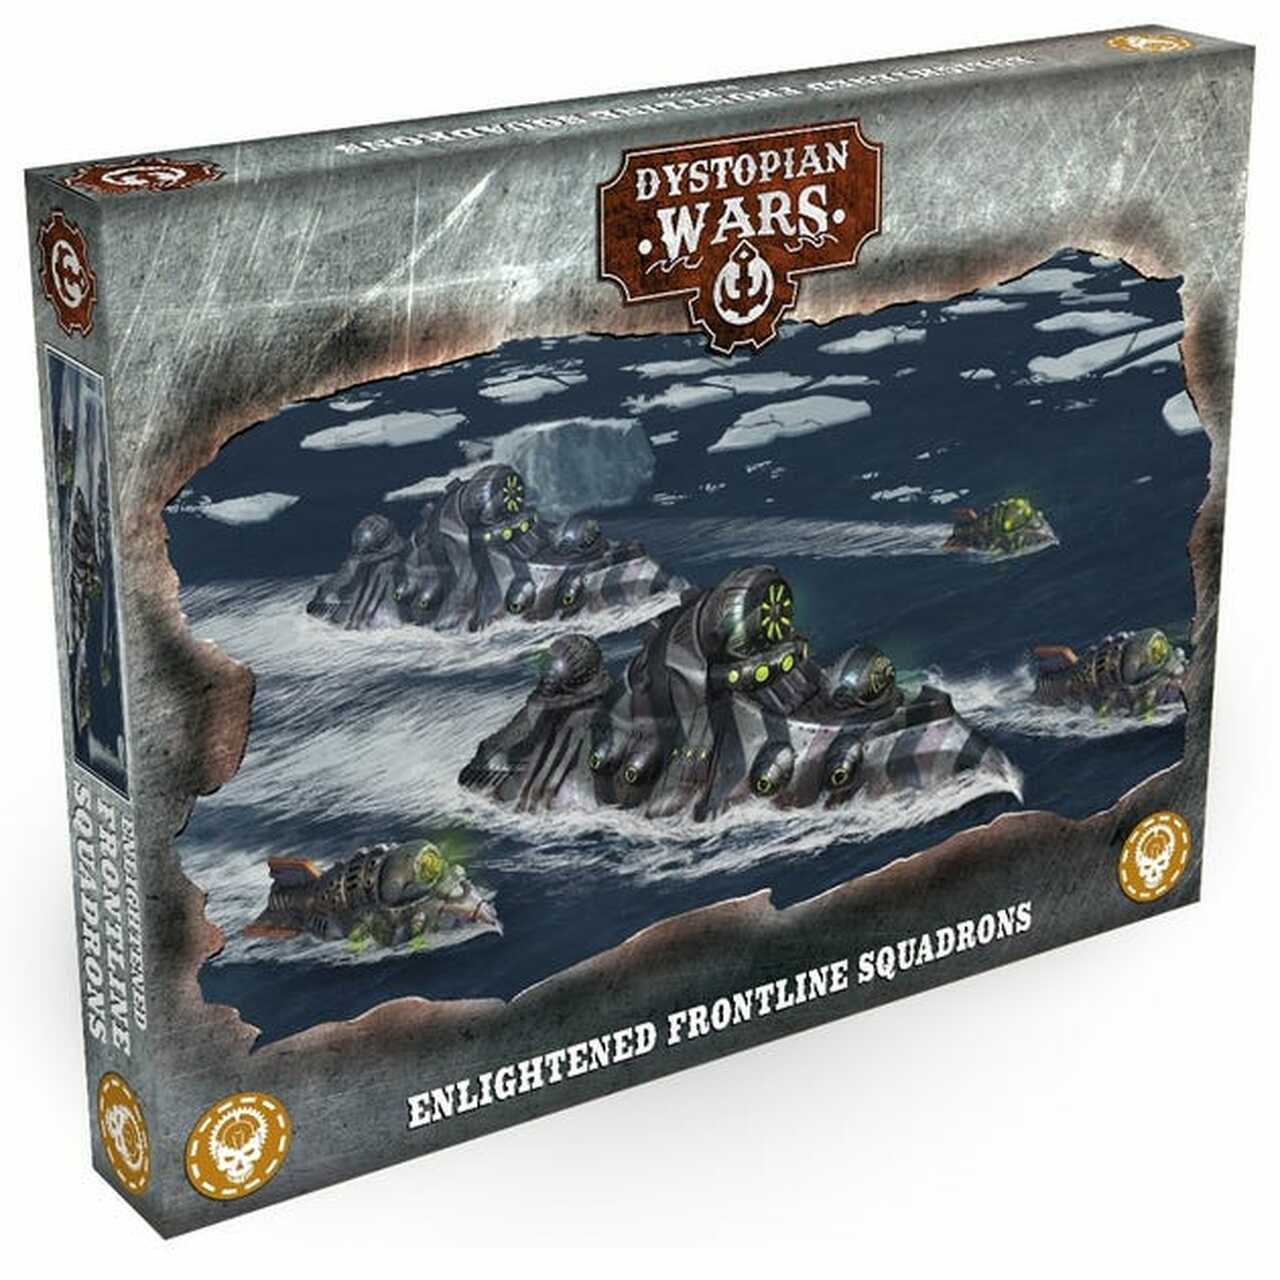 Dystopian Wars The Covenant of the Enlightened Frontline Squadrons